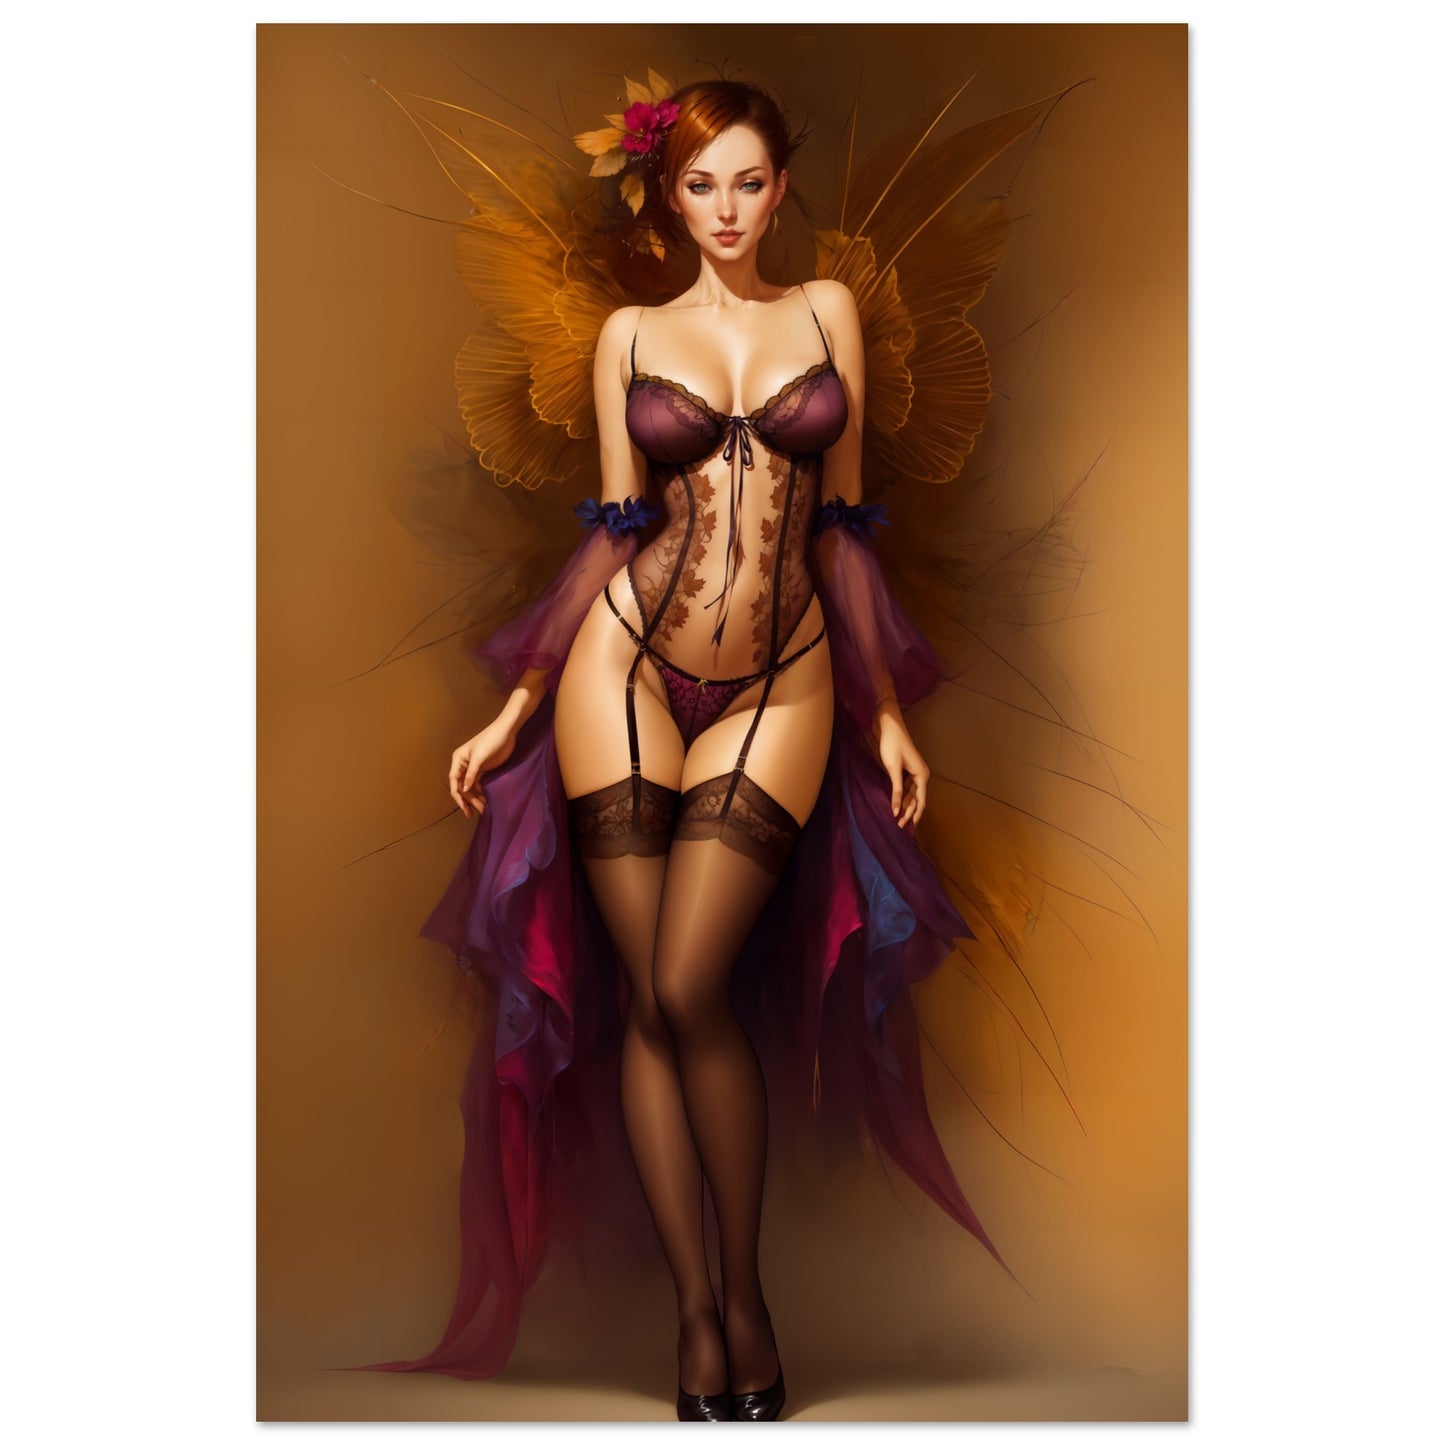 The Daily Pinup #91 - The Lingerie Fairy Wall Art